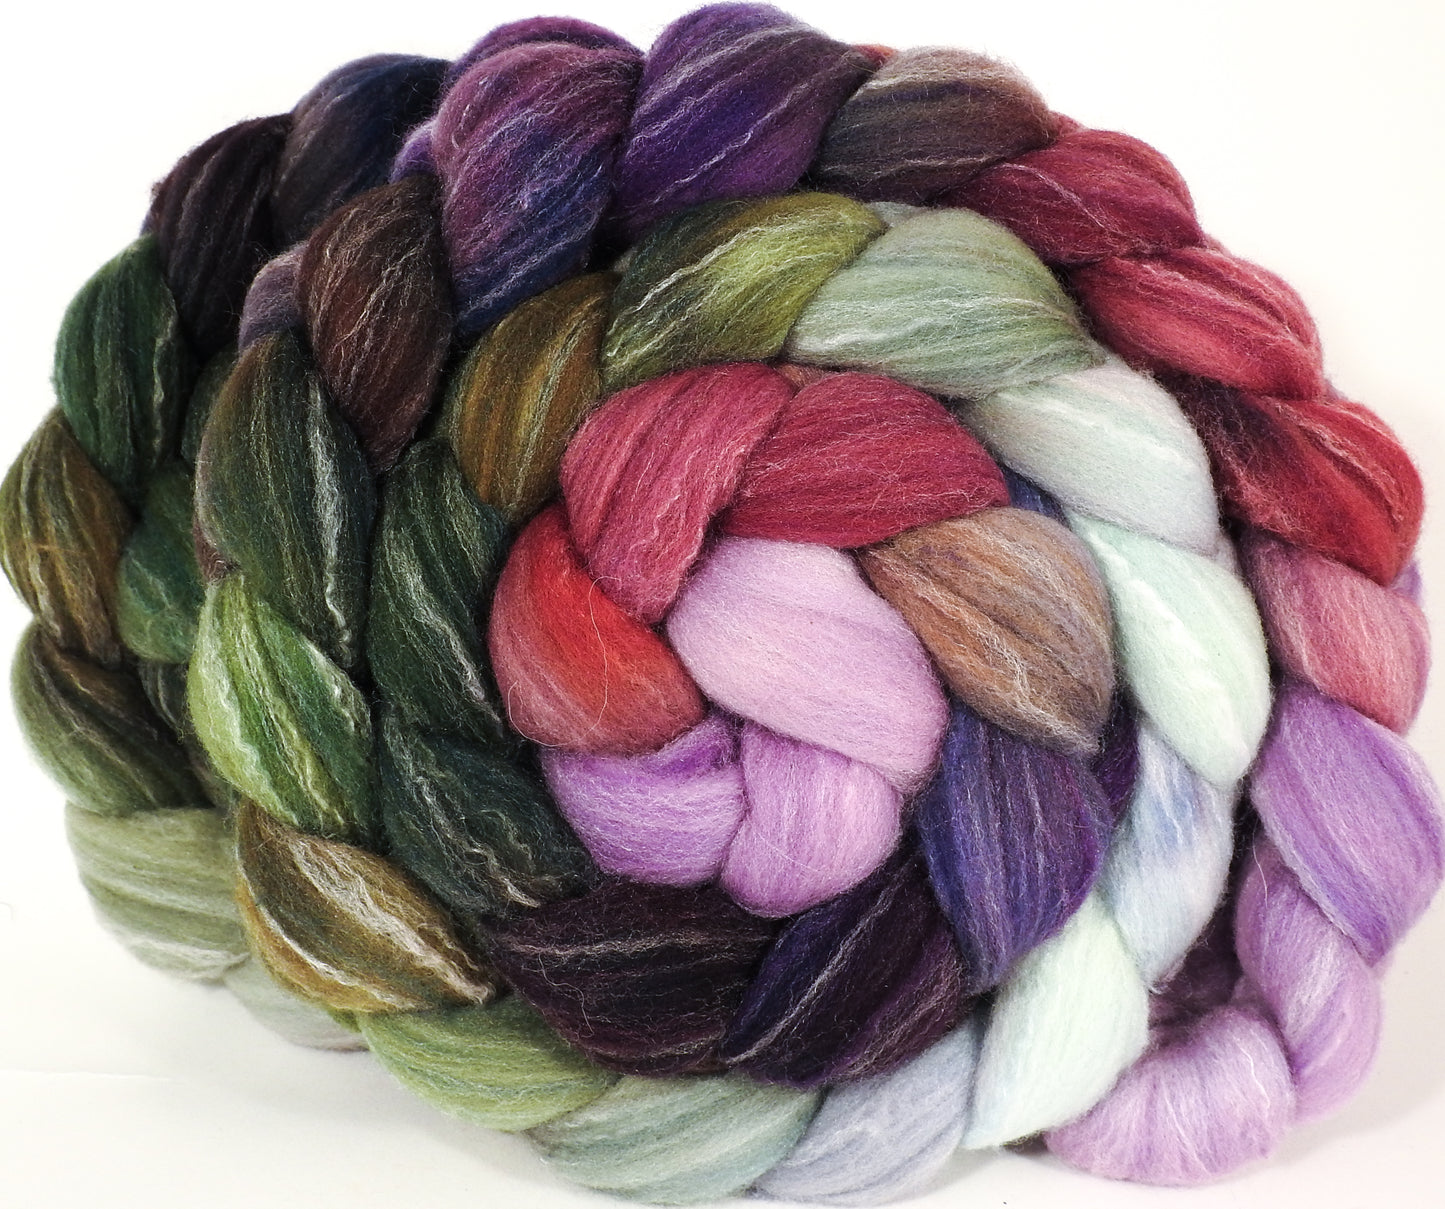 Hand dyed top for spinning -Cabbages & Kings (5.4 oz.) Targhee/silk/ bamboo ( 80/10/10) - Inglenook Fibers